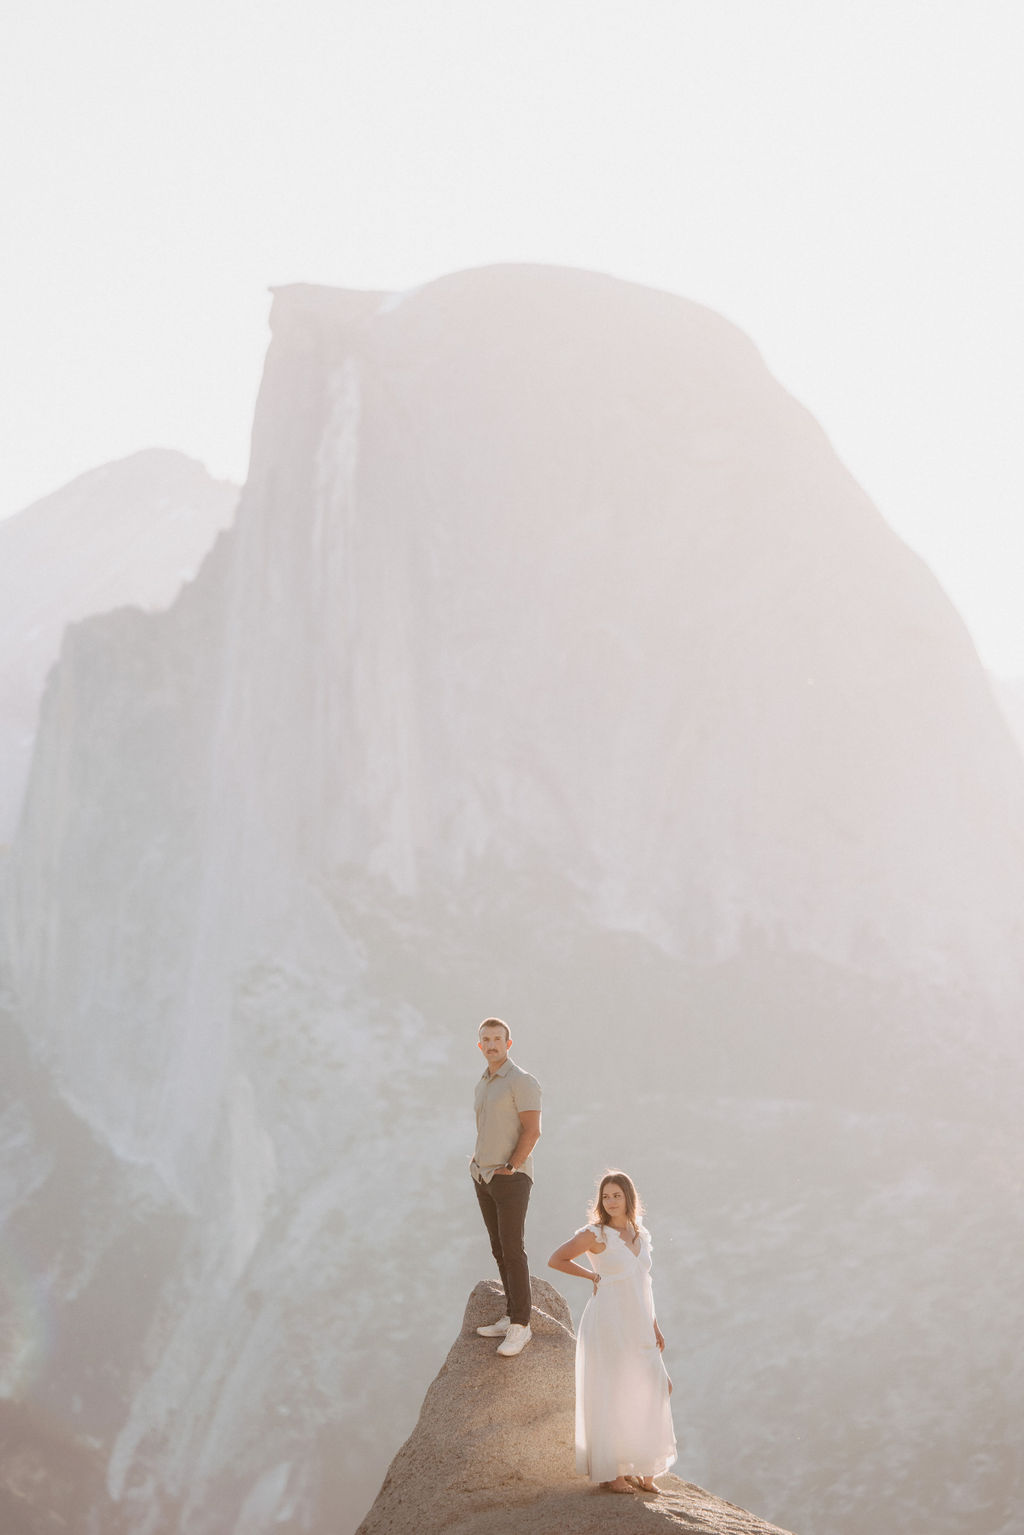 Two people stand on a rock ledge, with a large, hazy mountain in the background. One is dressed in light-colored suit and pants, the other in a white dress. The scene is backlit by the sun.